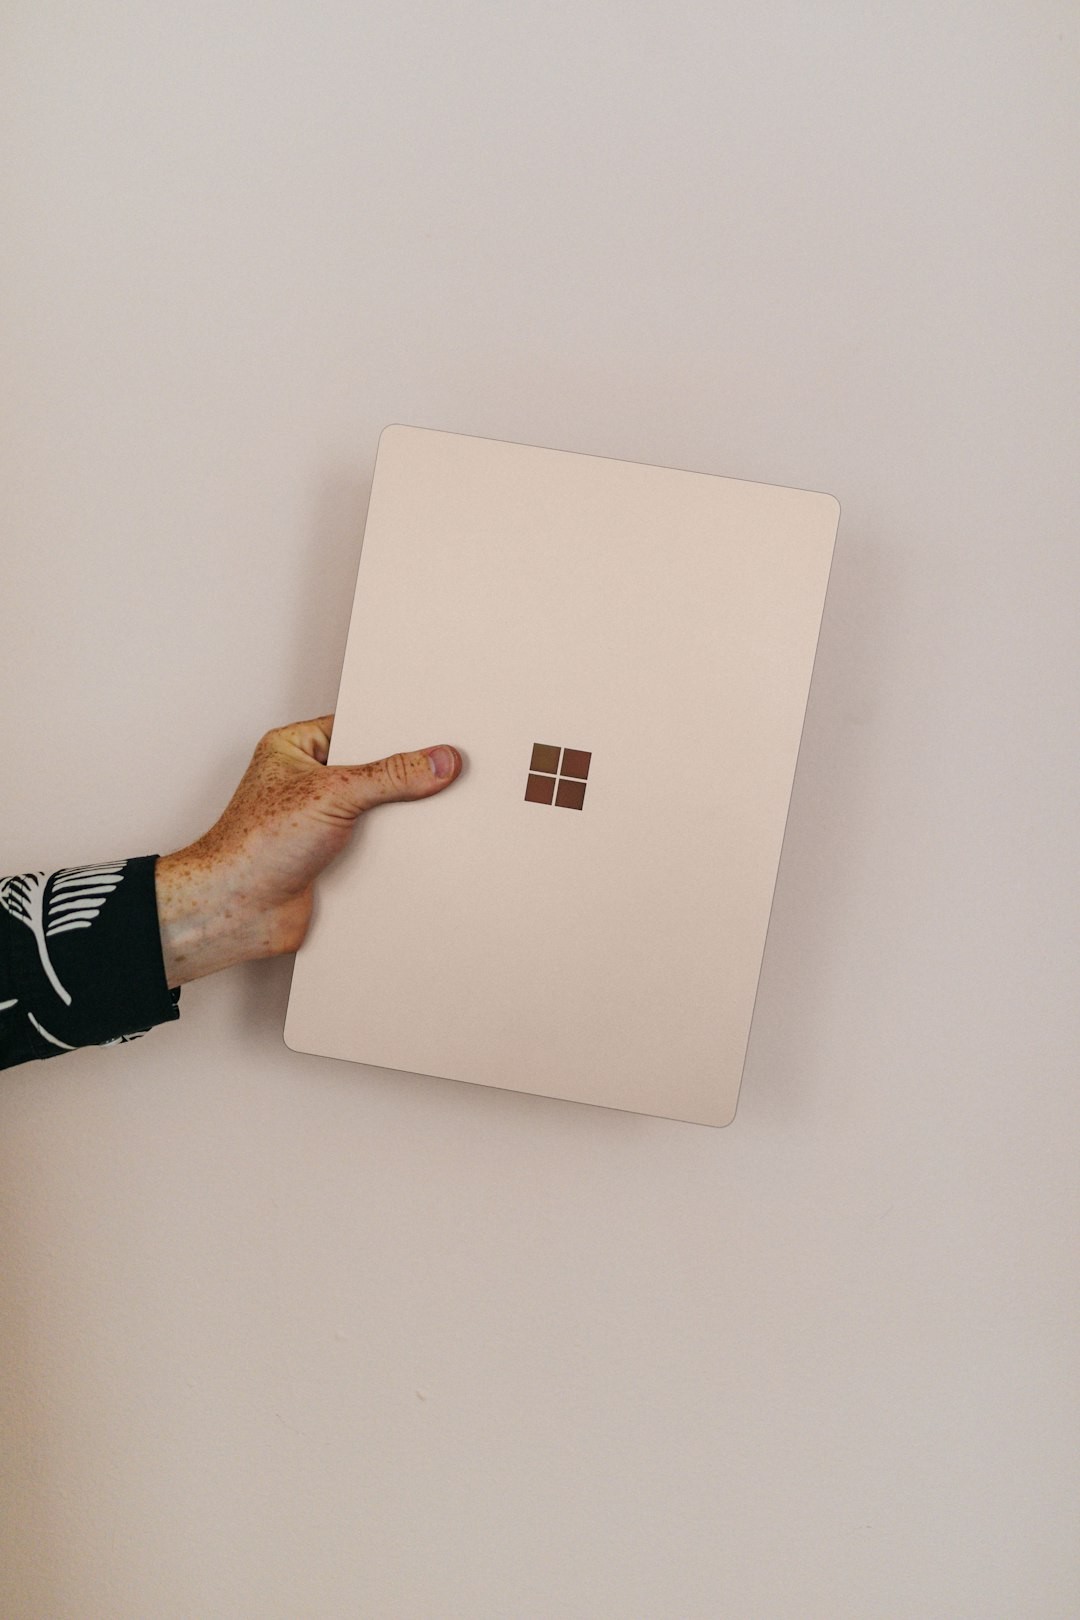 Microsoft Surface Laptop 3 in Sandstone 

Shot by: Nathan Dumlao 